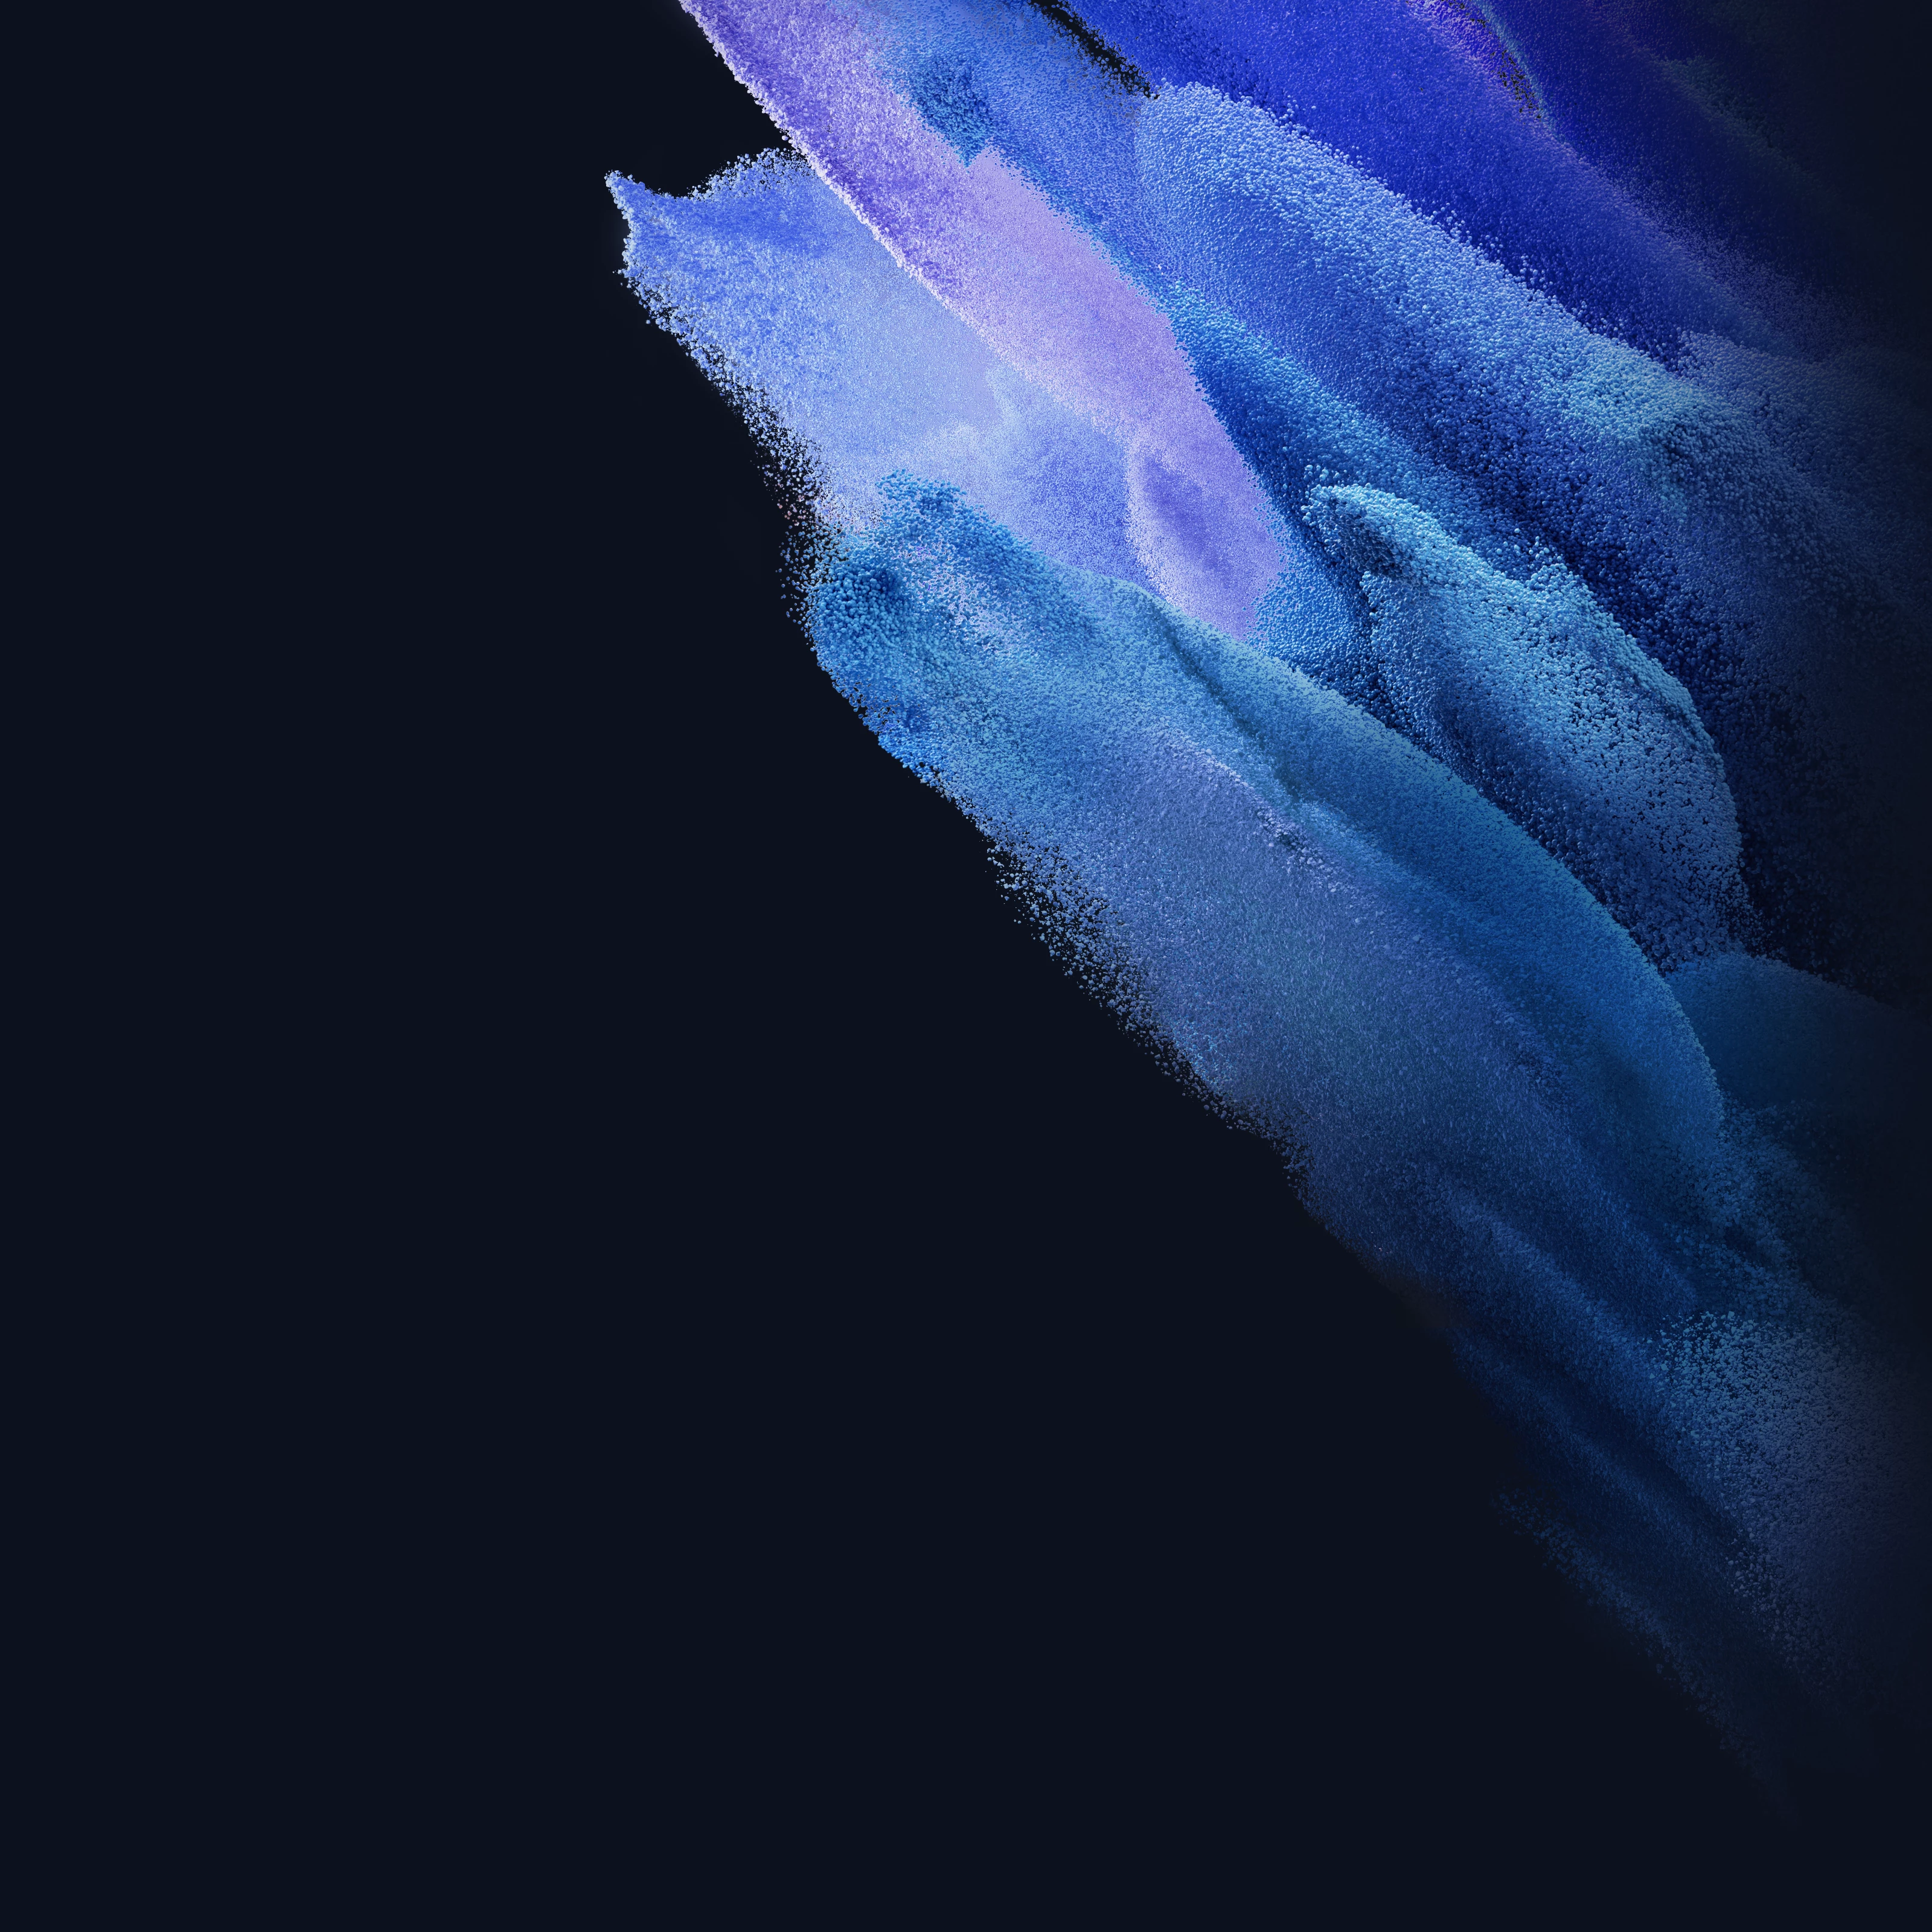 Samsung Galaxy S21 4K Wallpaper, Stock, AMOLED, Particles, Blue, Black background, Abstract